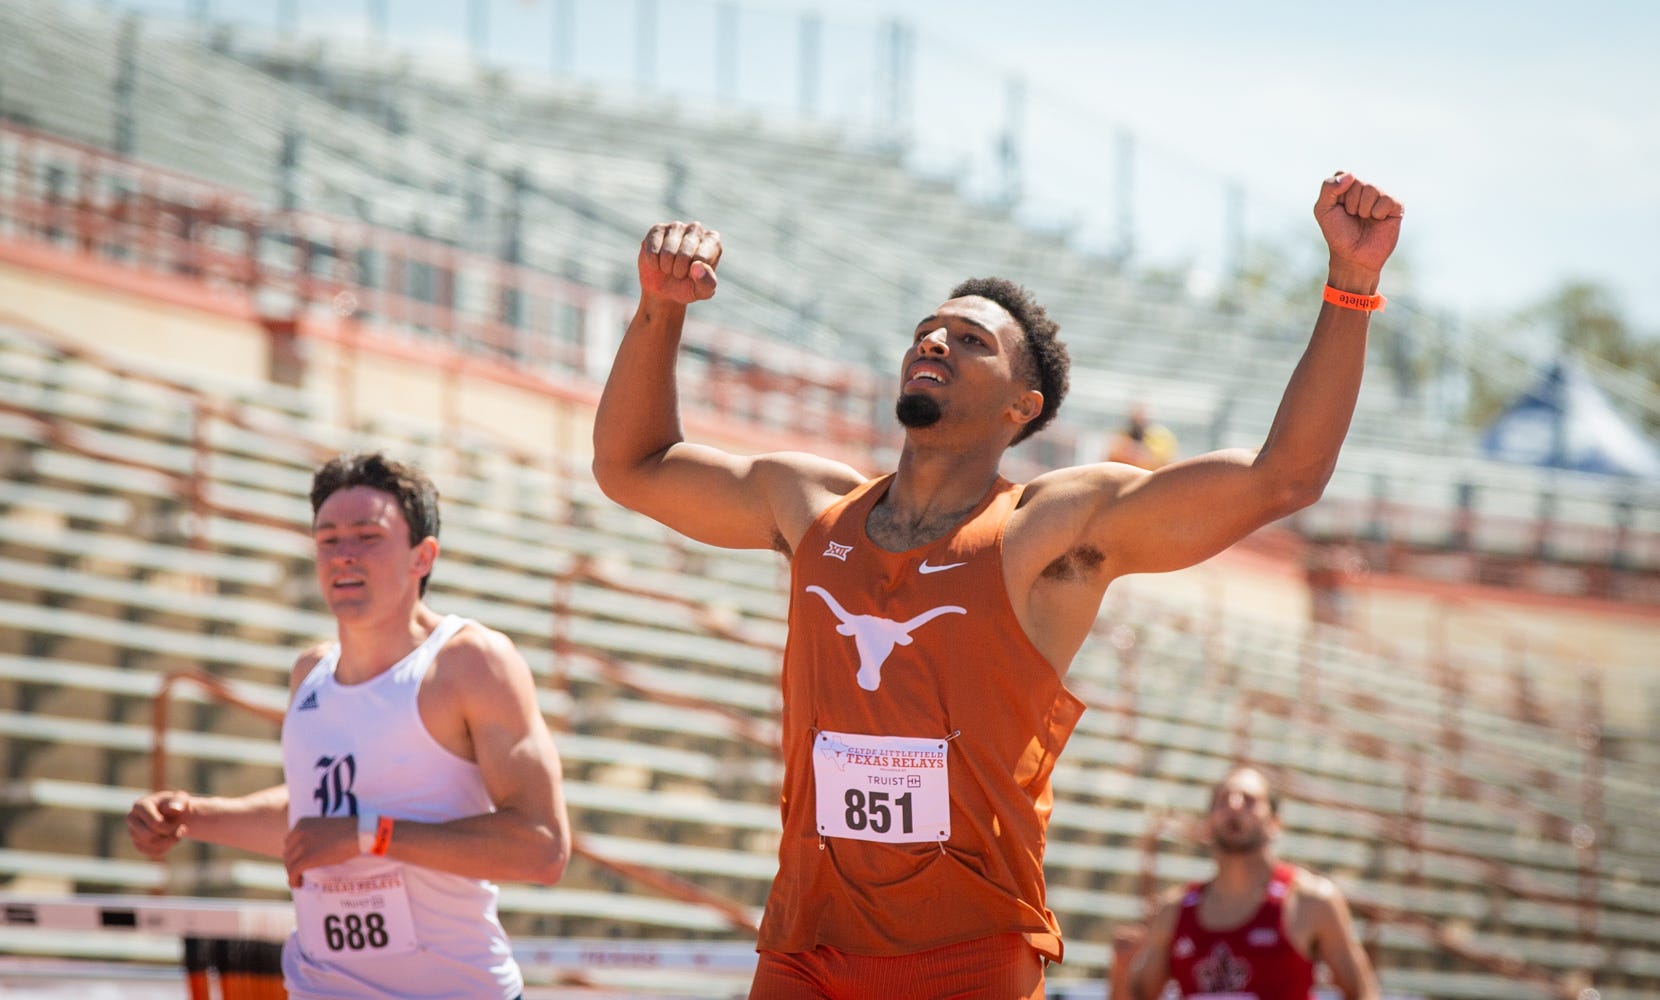 See the schedule for 2022 Texas Relays track and field events